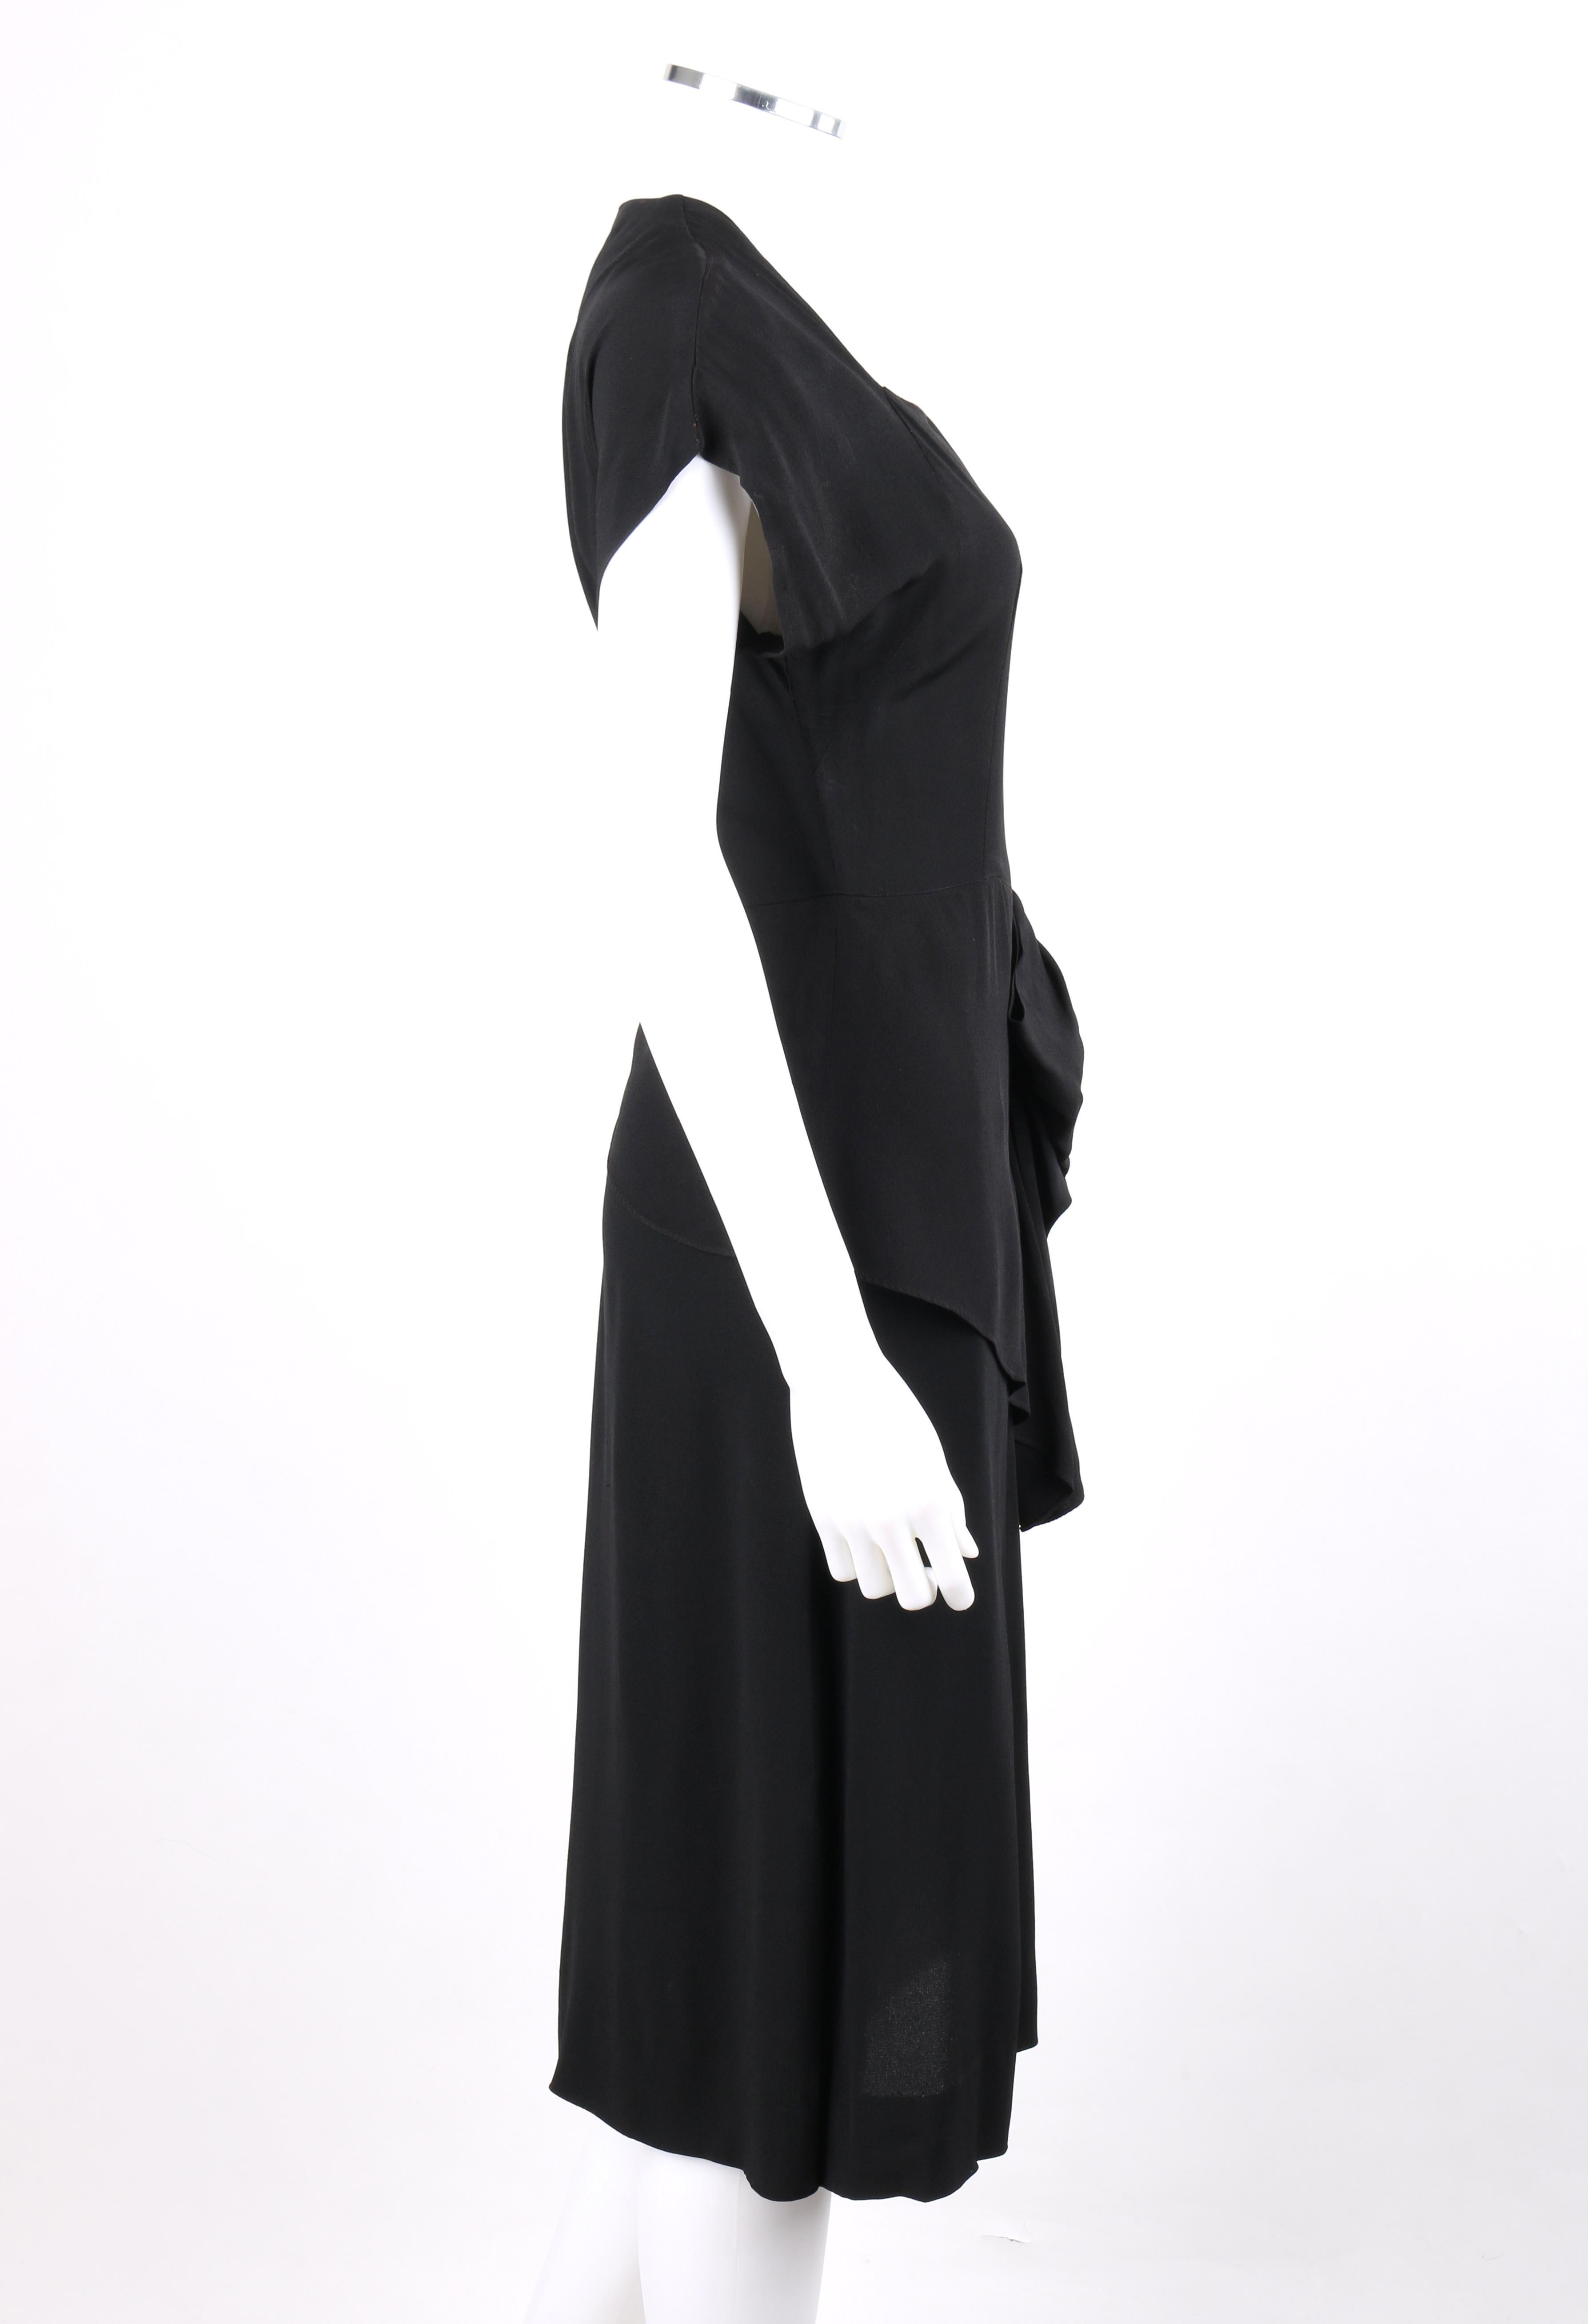 ANN WALKER c.1940’s Black Crepe Ruched Bow Peplum Short Sleeve Afternoon Dress

Circa: 1940’s 
Label(s): Ann Walker Original
Style: Peplum dress
Color(s): Black
Lined: No 
Unmarked Fabric Content (feel of): Rayon crepe (shell); metal